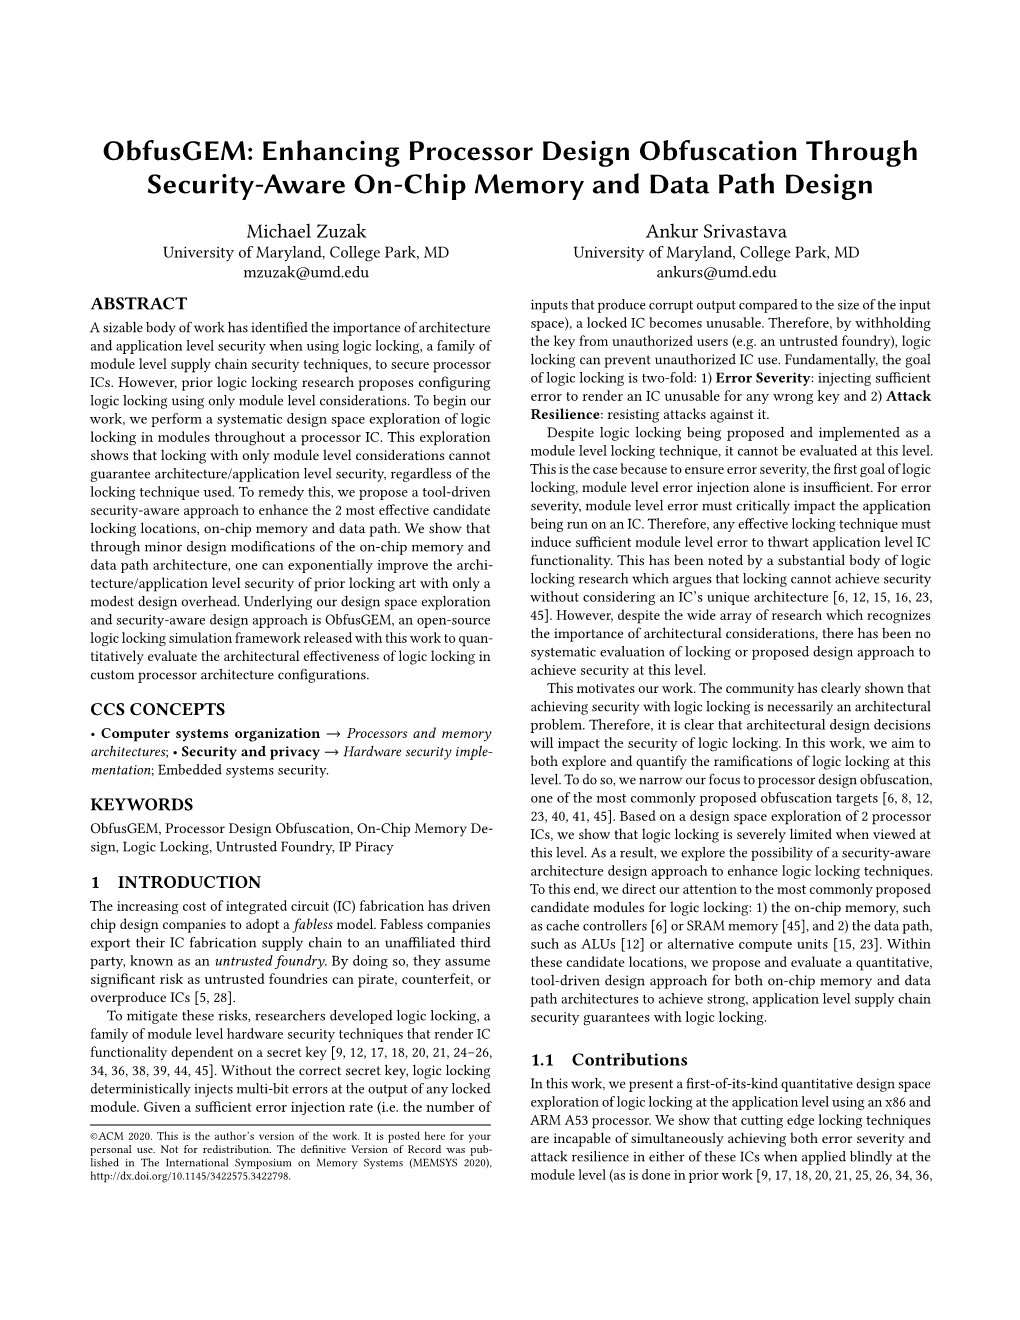 Enhancing Processor Design Obfuscation Through Security-Aware On-Chip Memory and Data Path Design